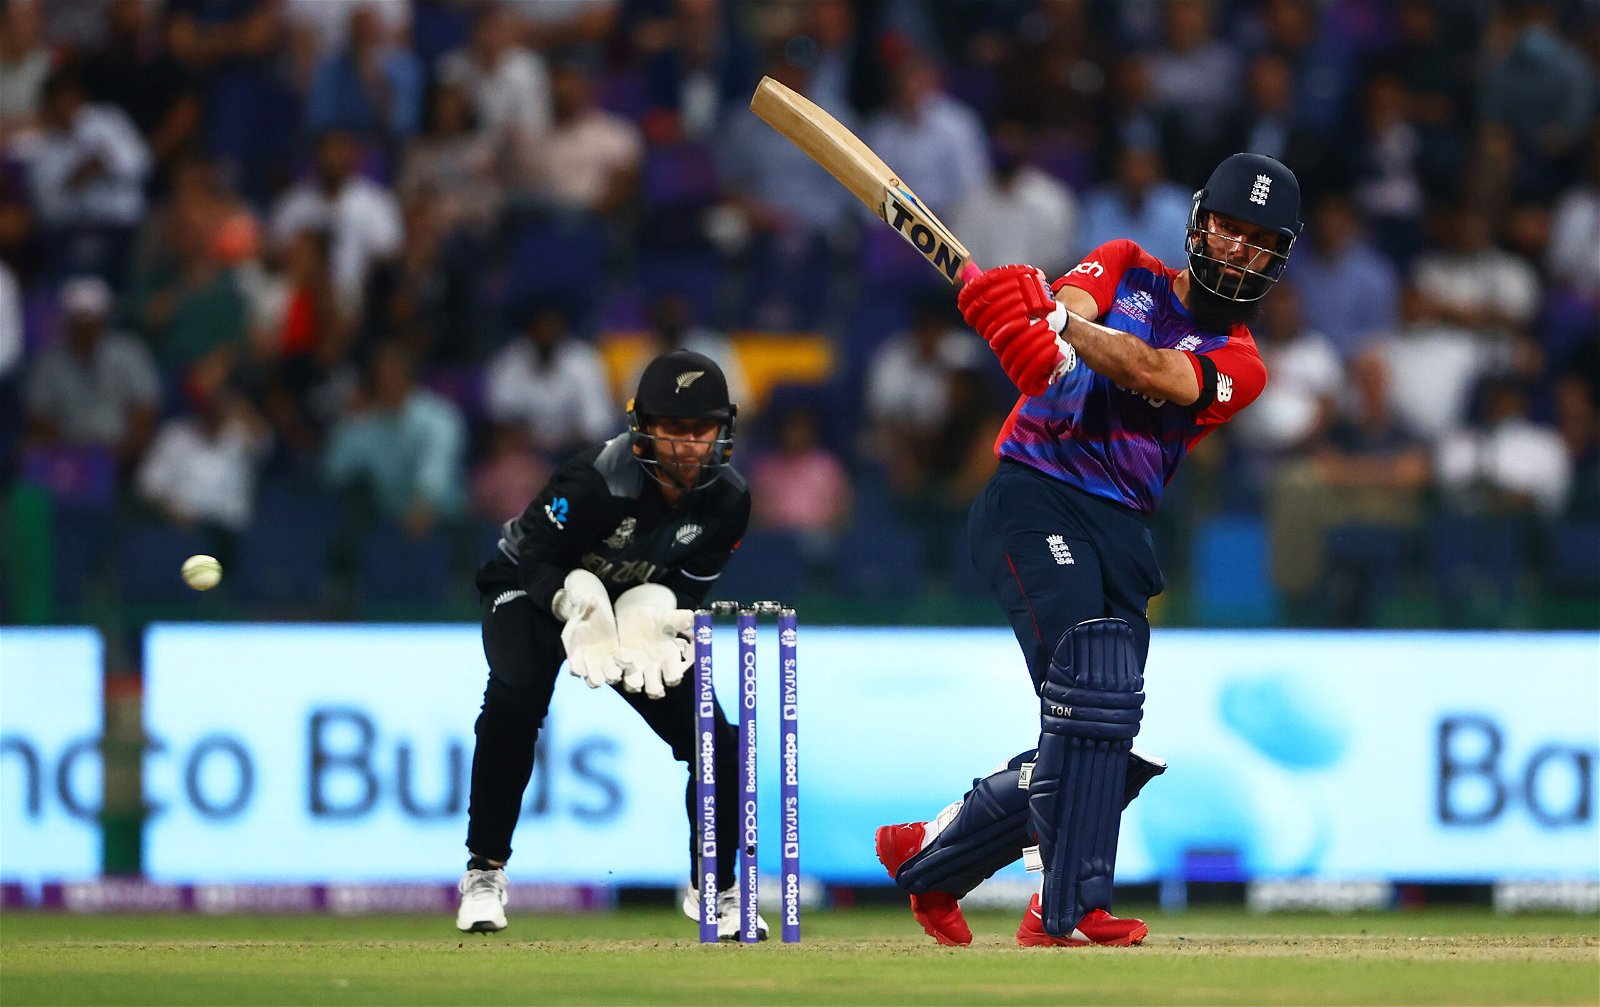 Moeen Ali, T20 World Cup 2021